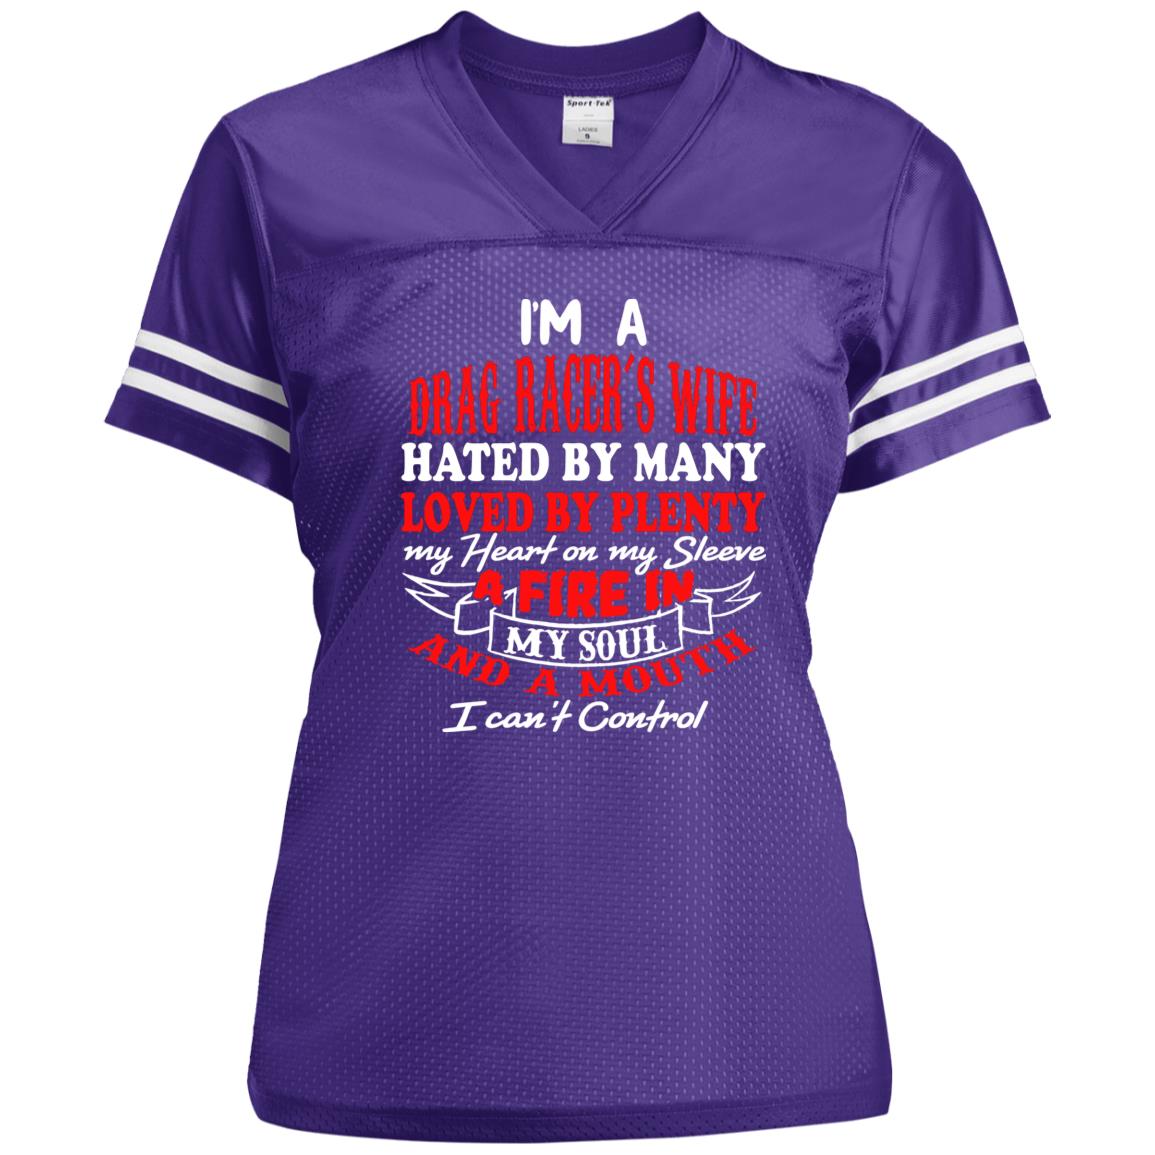 I'm A Drag Racer's Wife Hated By Many Loved By Plenty Ladies' Replica Jersey